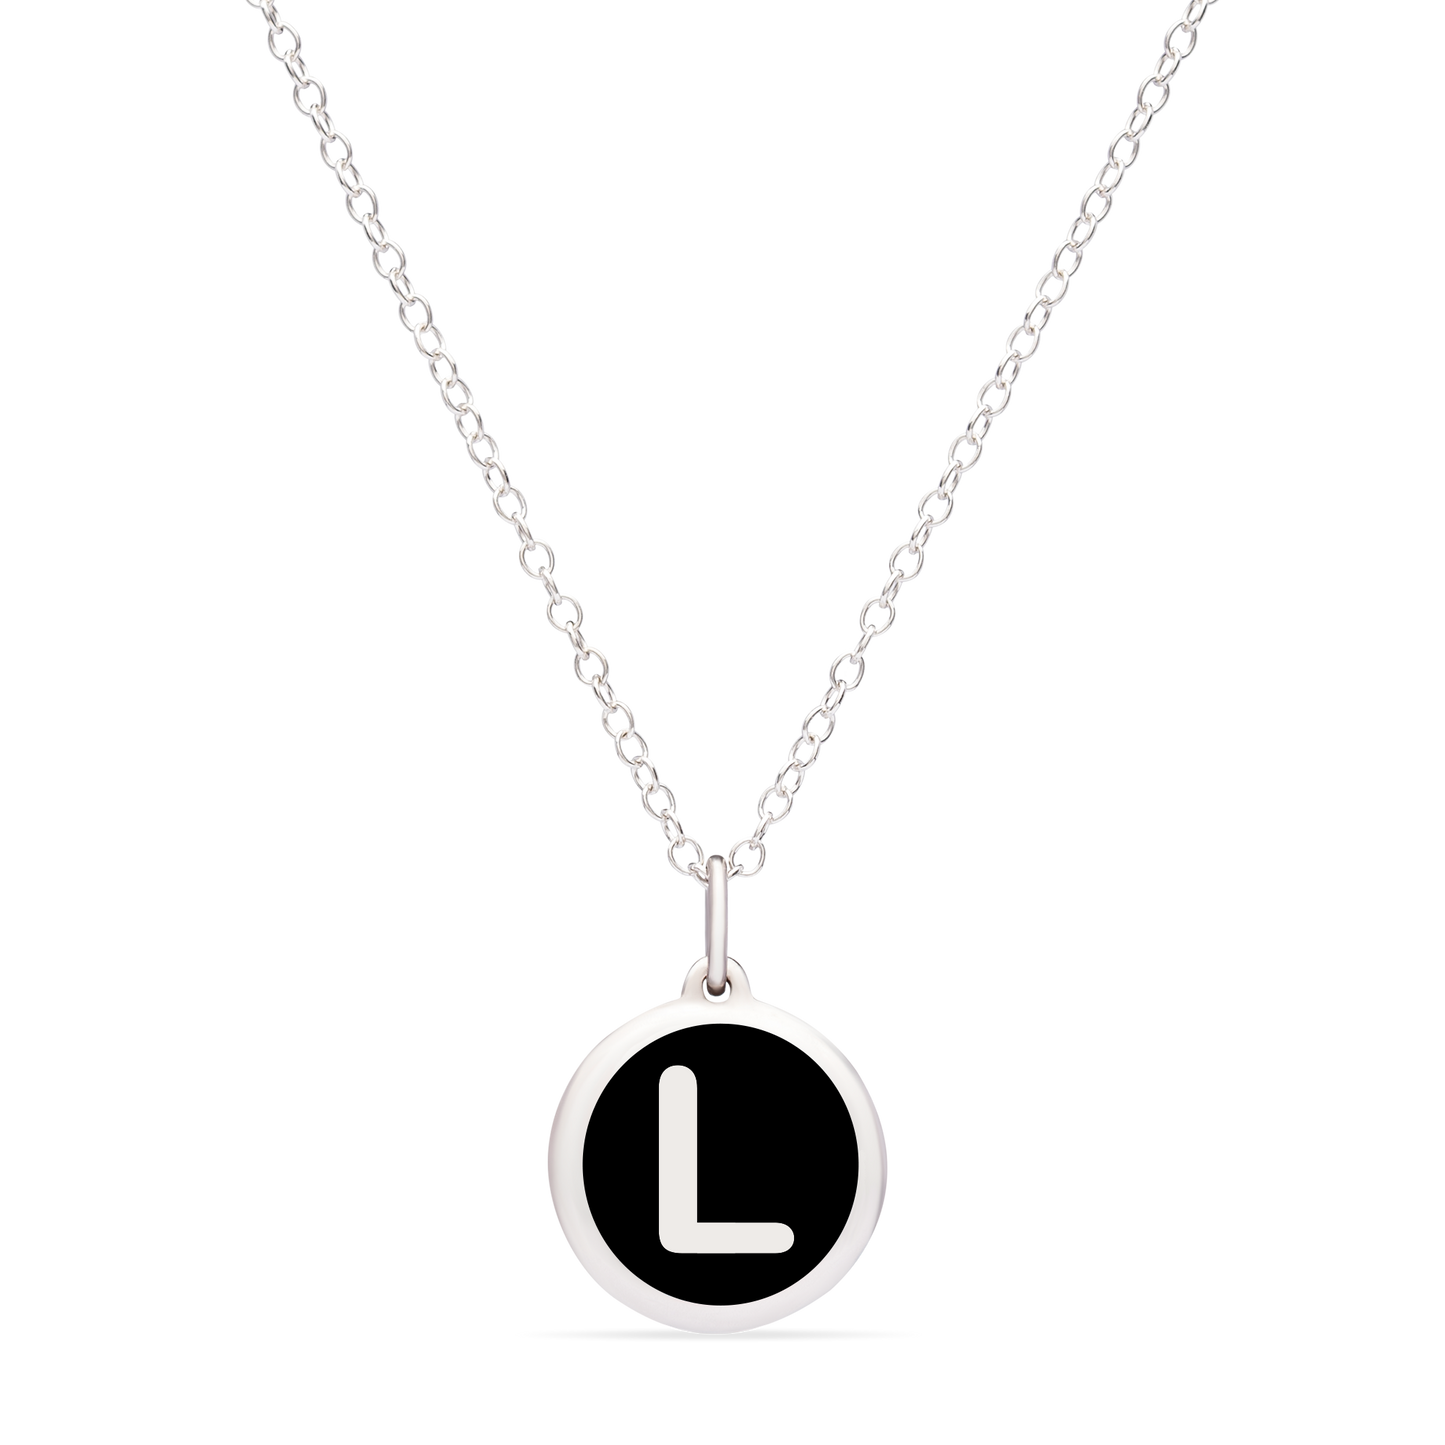 MINI INITIAL 'L' CHARM sterling silver with rhodium plate